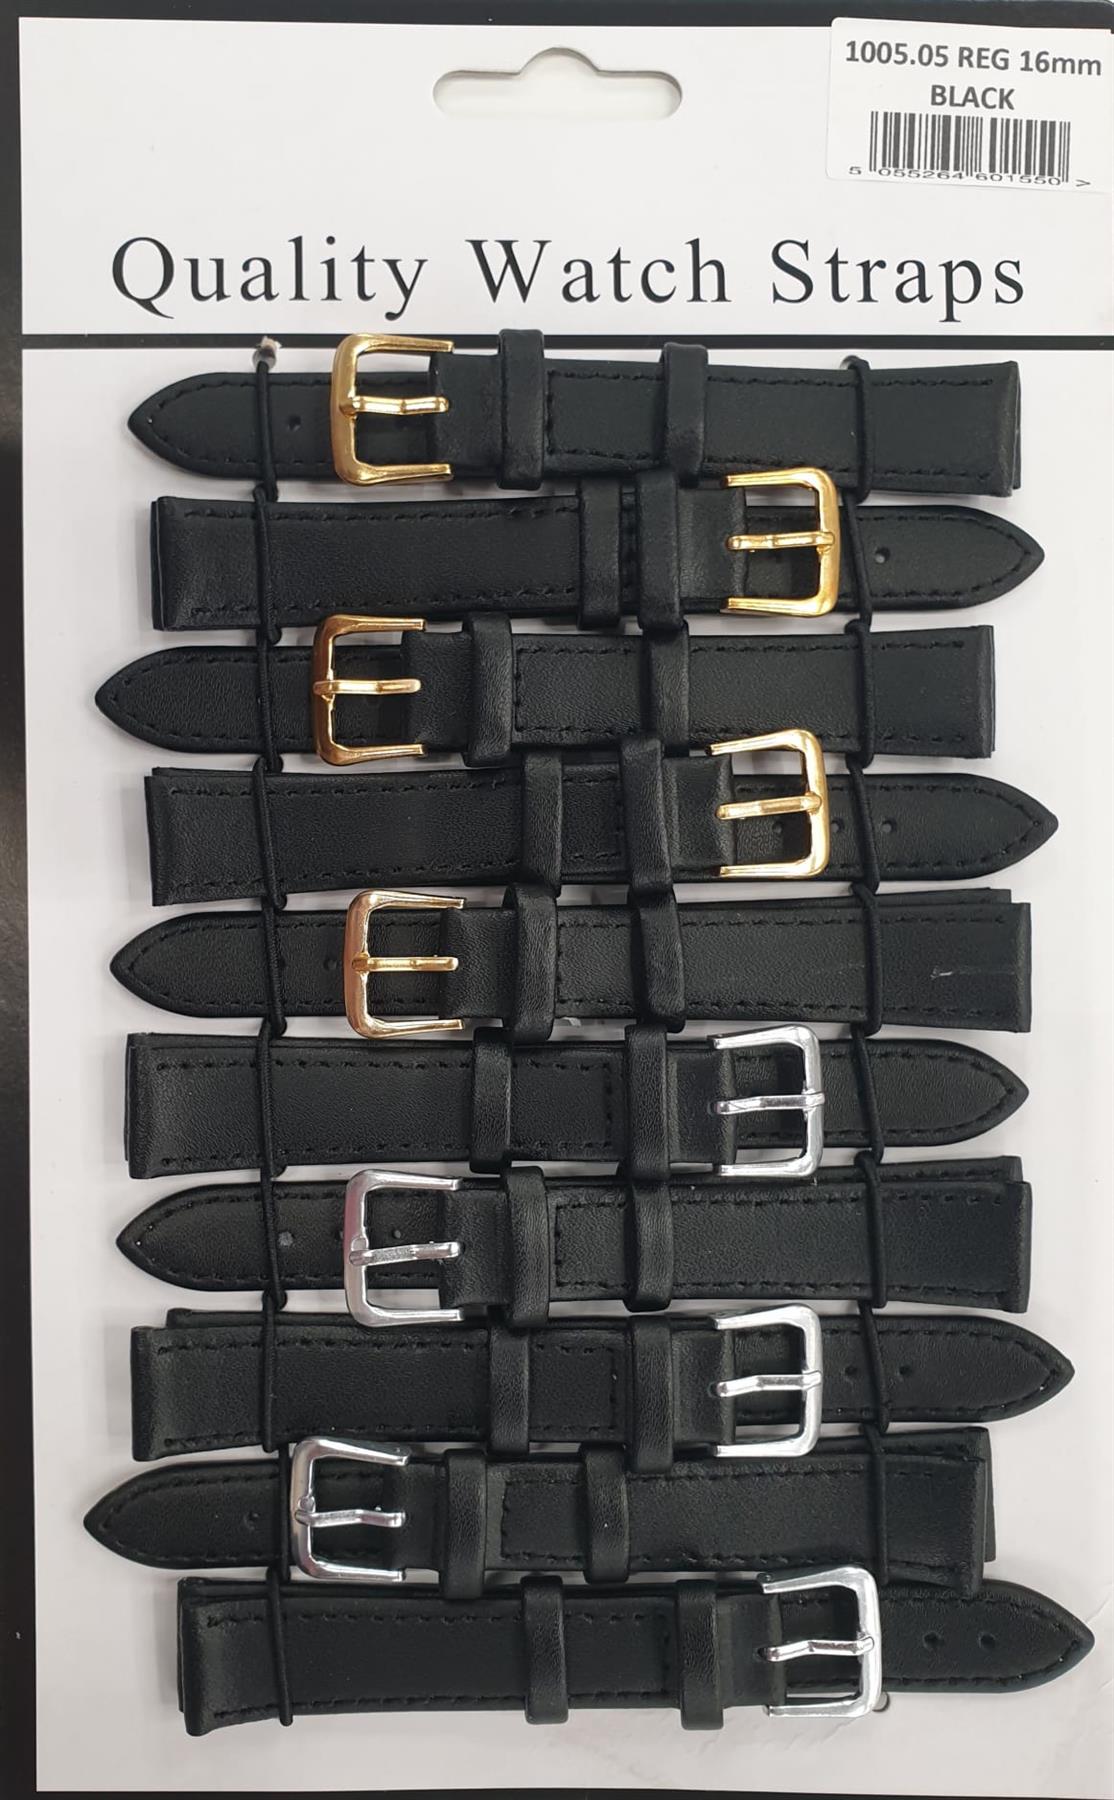 Leather Black Watch Straps Pk10 Available sizes 10mm To 24mm 1005.05